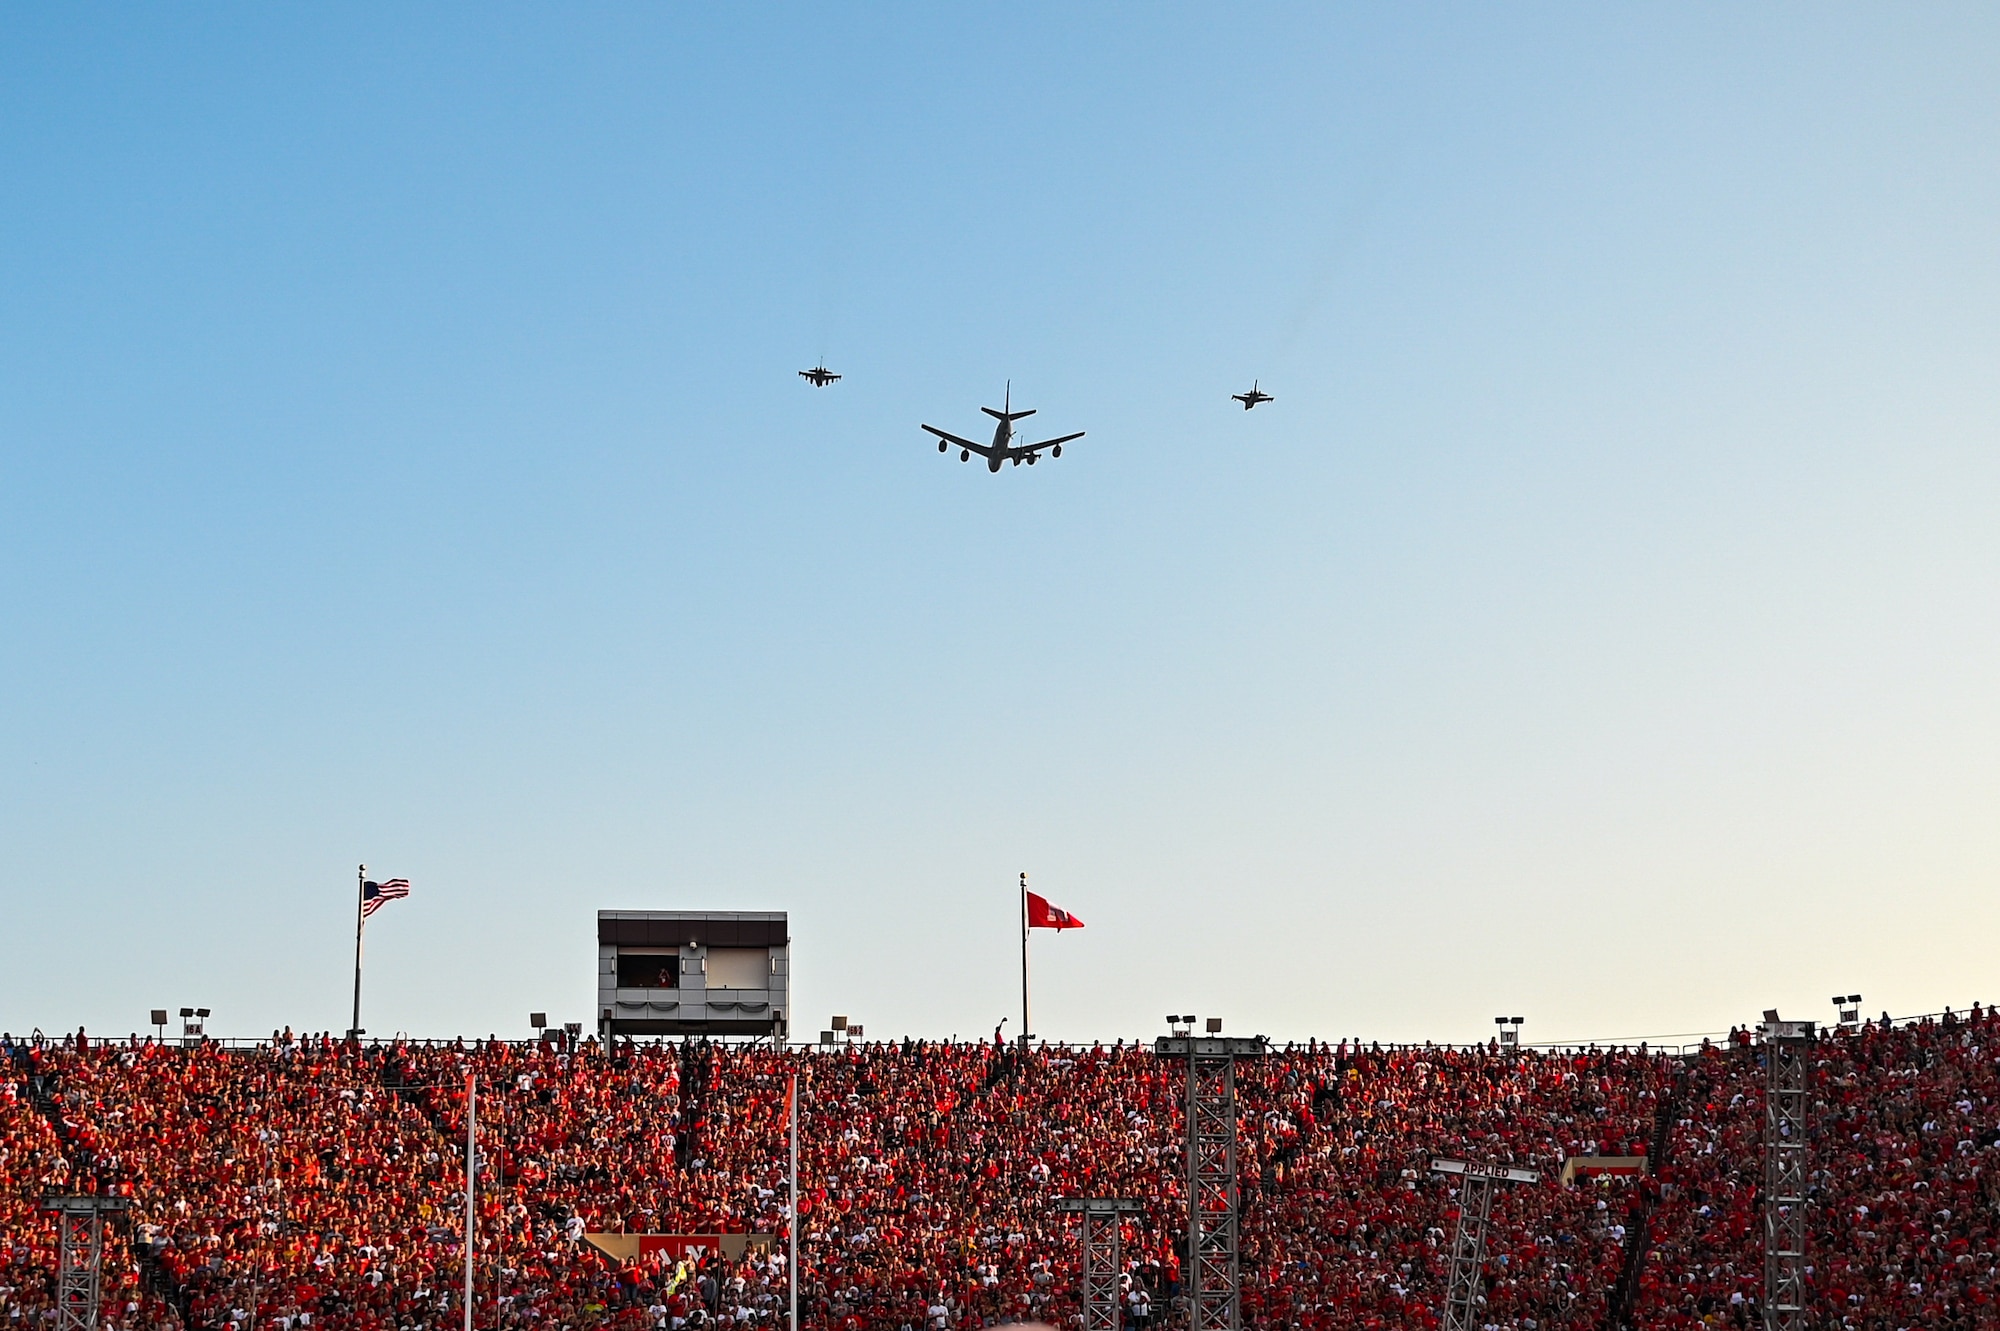 A KC-135R Stratotanker assigned to the 155th Air Refueling Wing flies over Memorial Stadium with F-16 Fighting Falcons assigned to the 114th Fighter Wing during the national anthem for the University of Nebraska volleyball game in Lincoln, Nebraska, Aug. 30, 2023. The event broke the world record for women’s sporting event attendance with 92,003 fans.